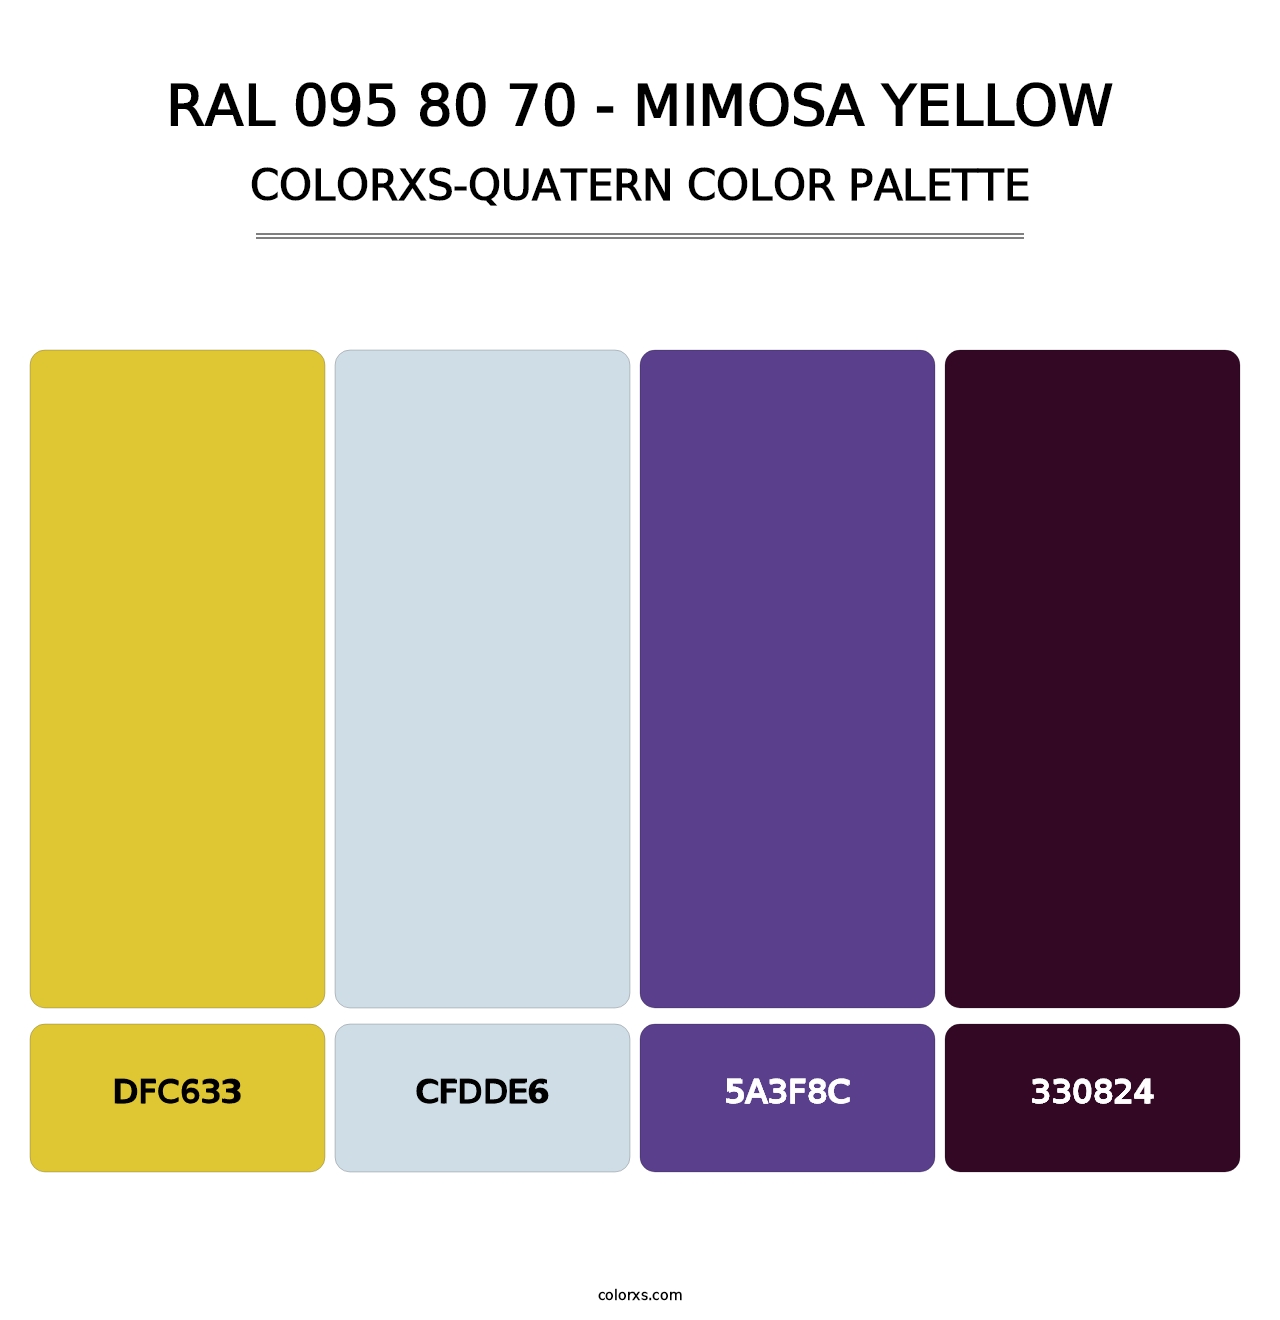 RAL 095 80 70 - Mimosa Yellow - Colorxs Quatern Palette